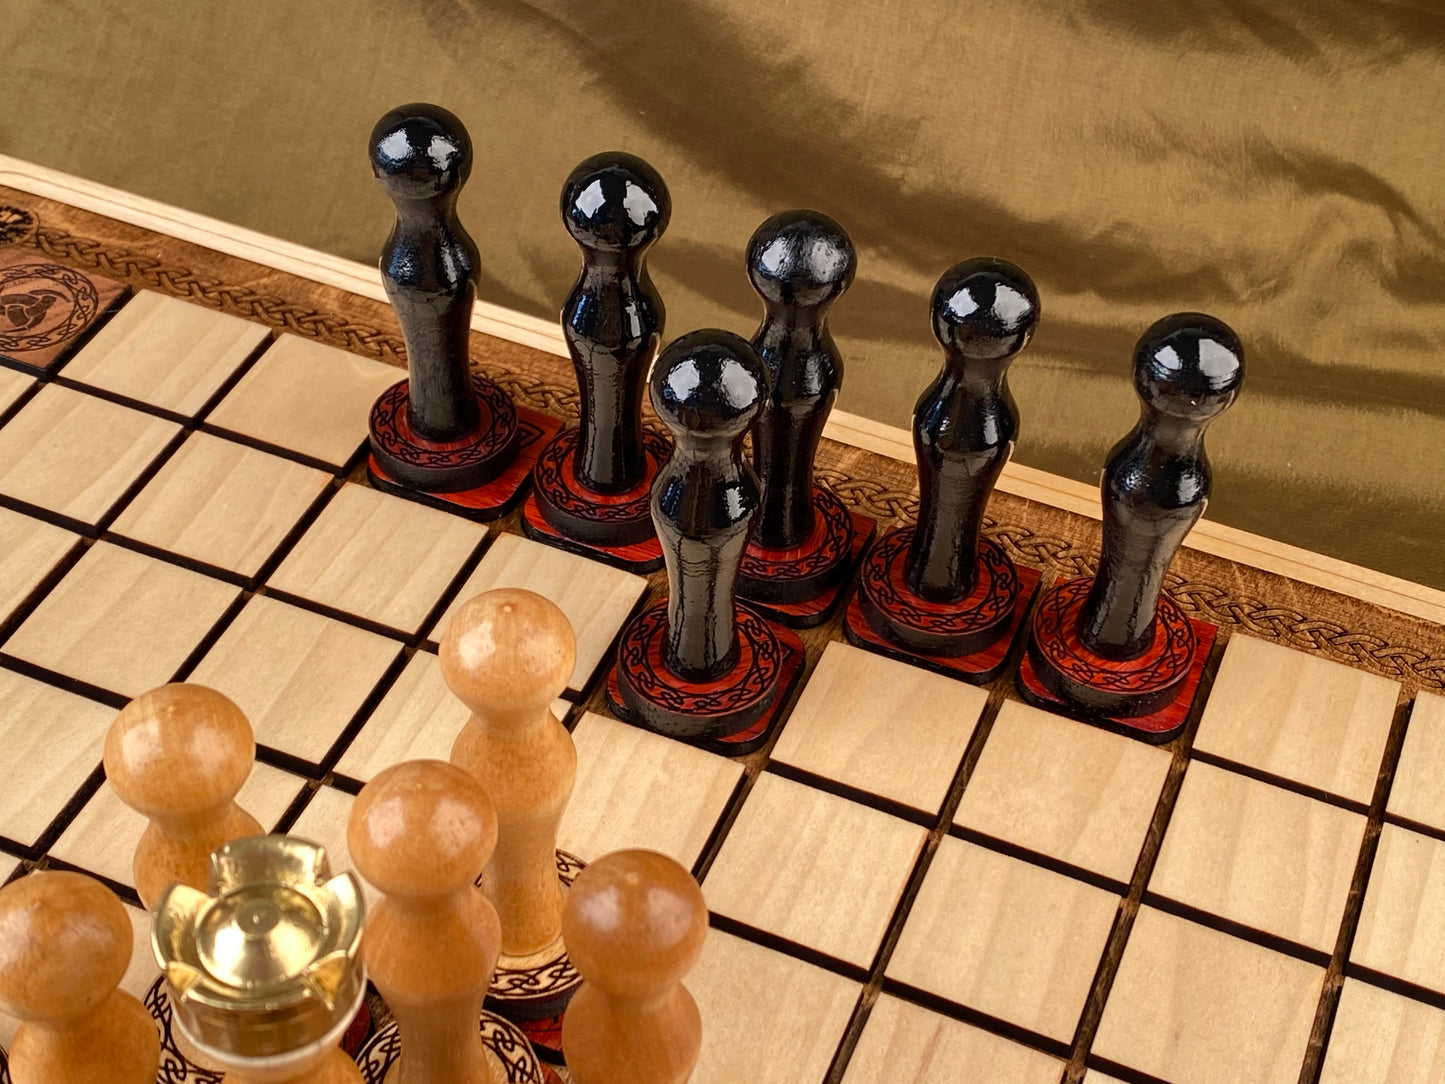 HNEFATAFL! Viking Chess. Deluxe Kings Edition ~ Signed & Numbered.